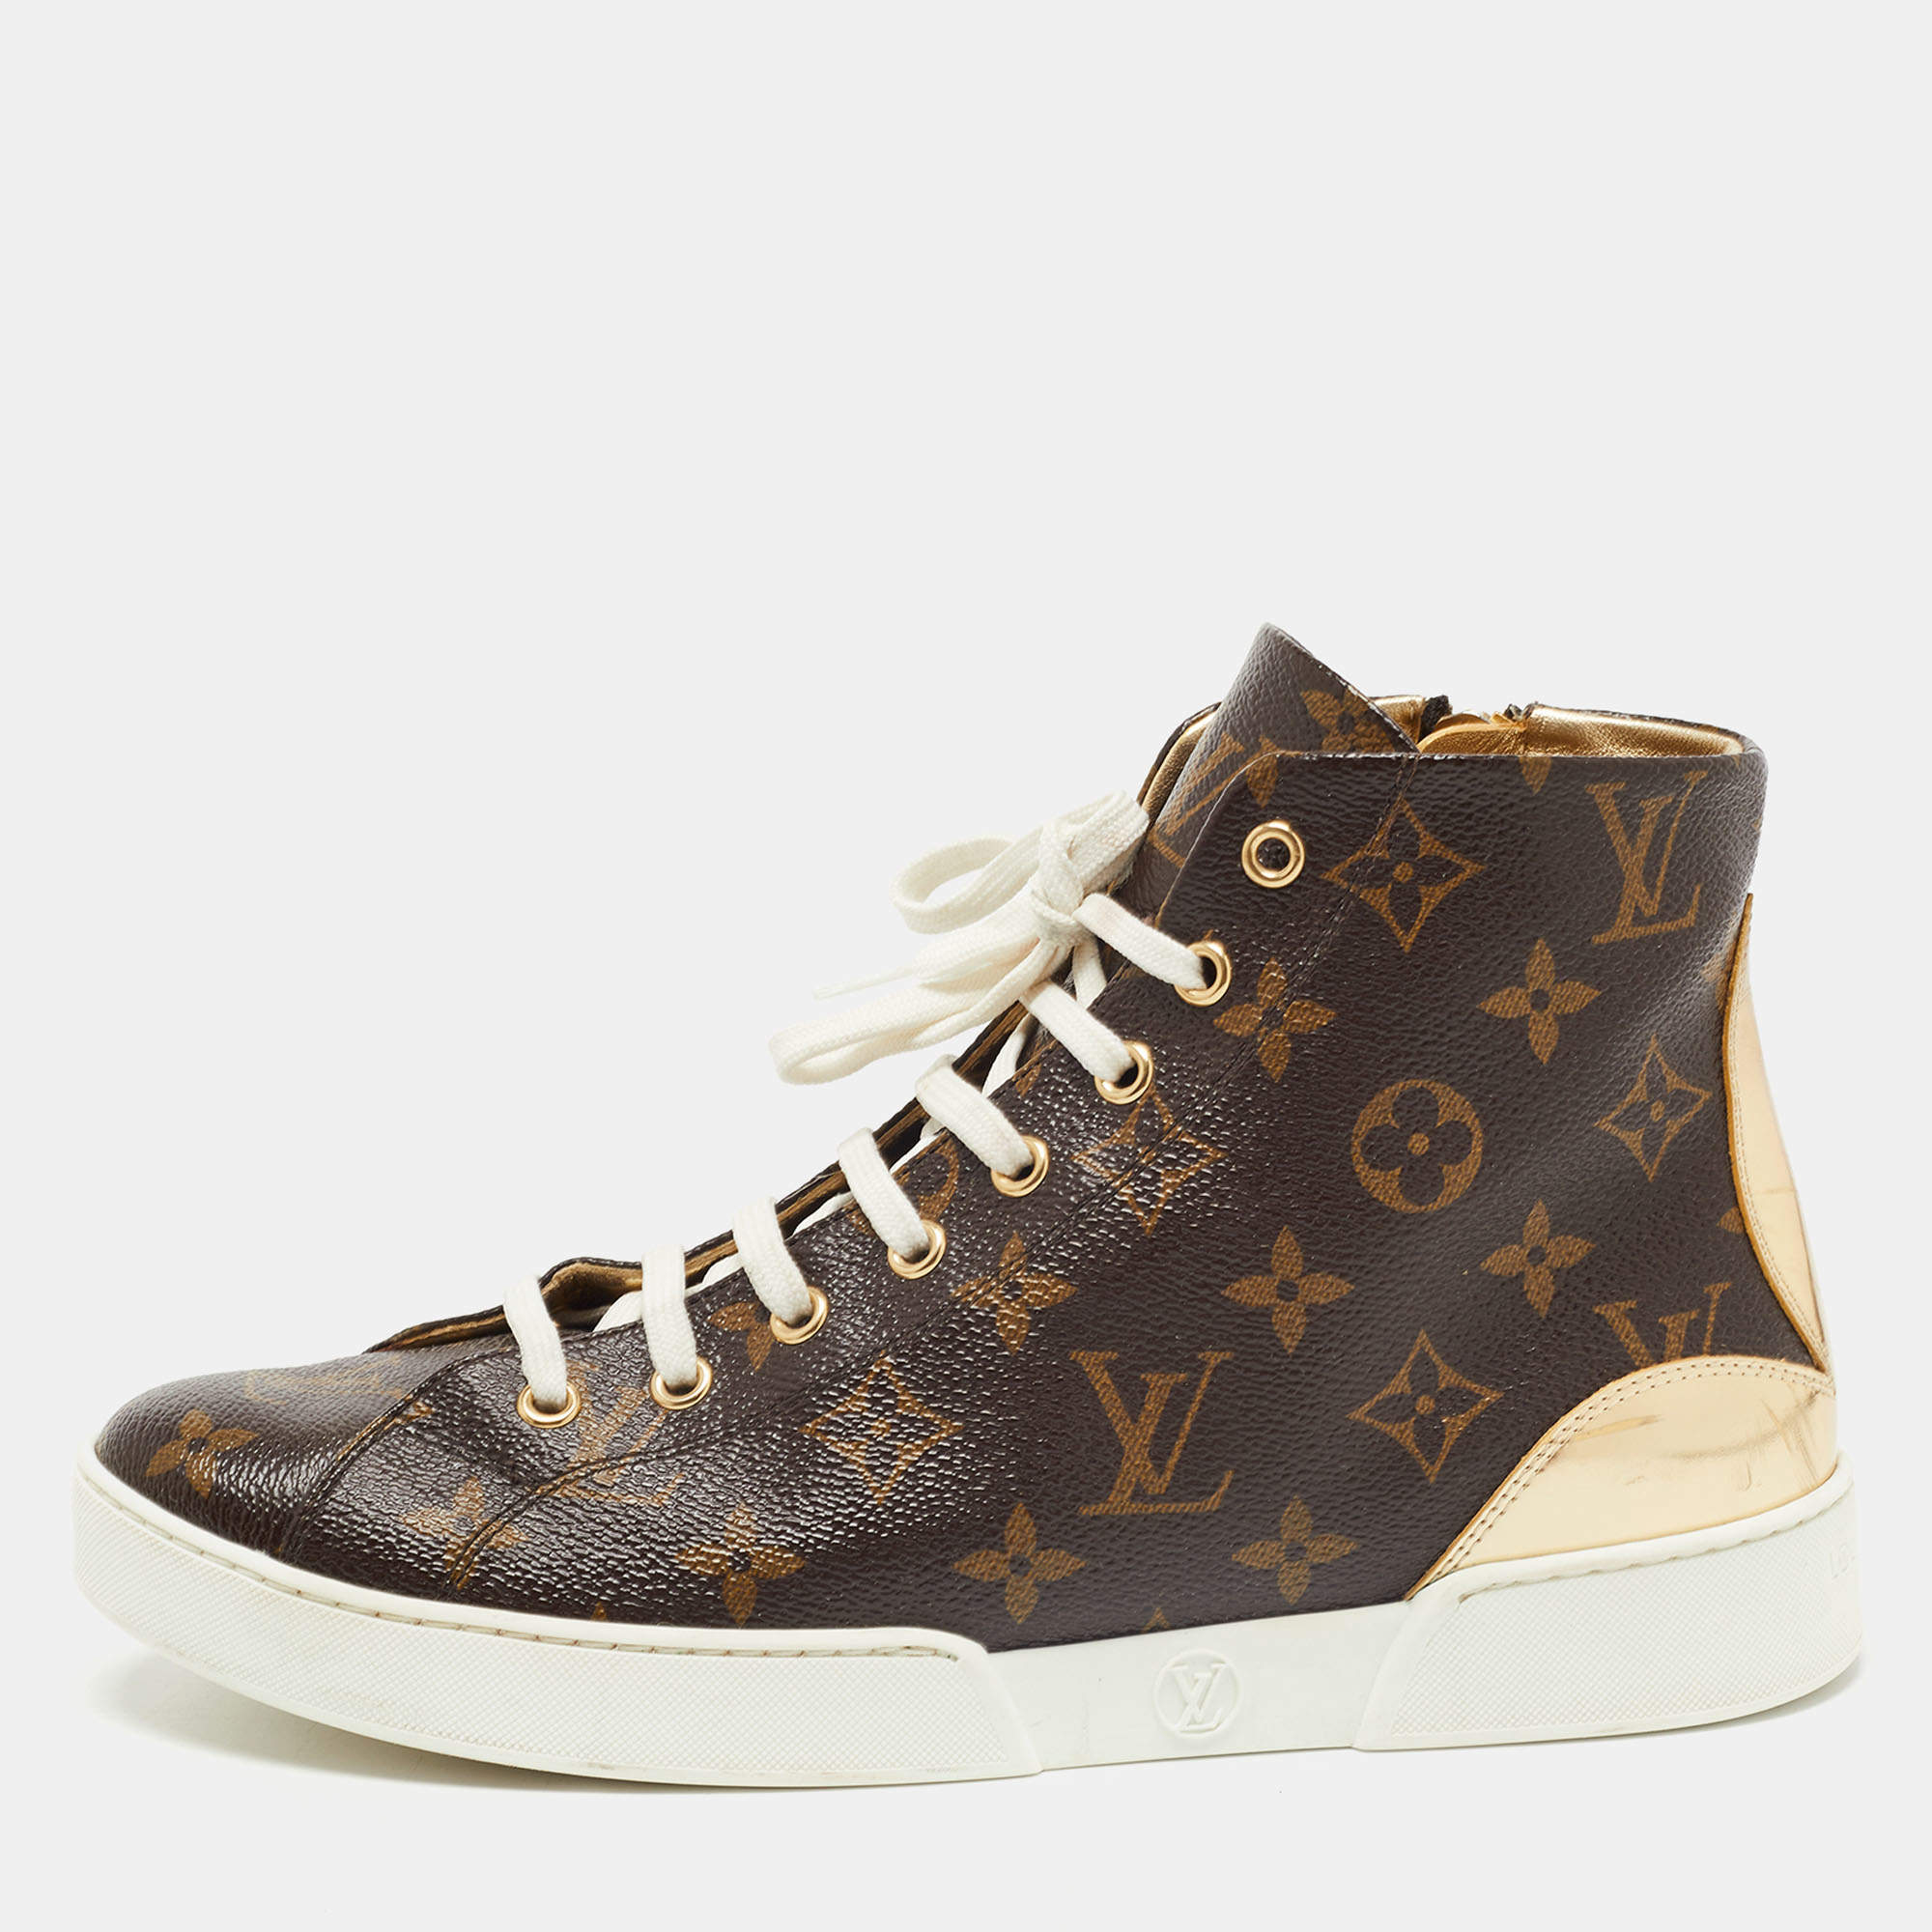 Louis Vuitton Brown Monogram Canvas and Leather Stellar Sneakers Size 39